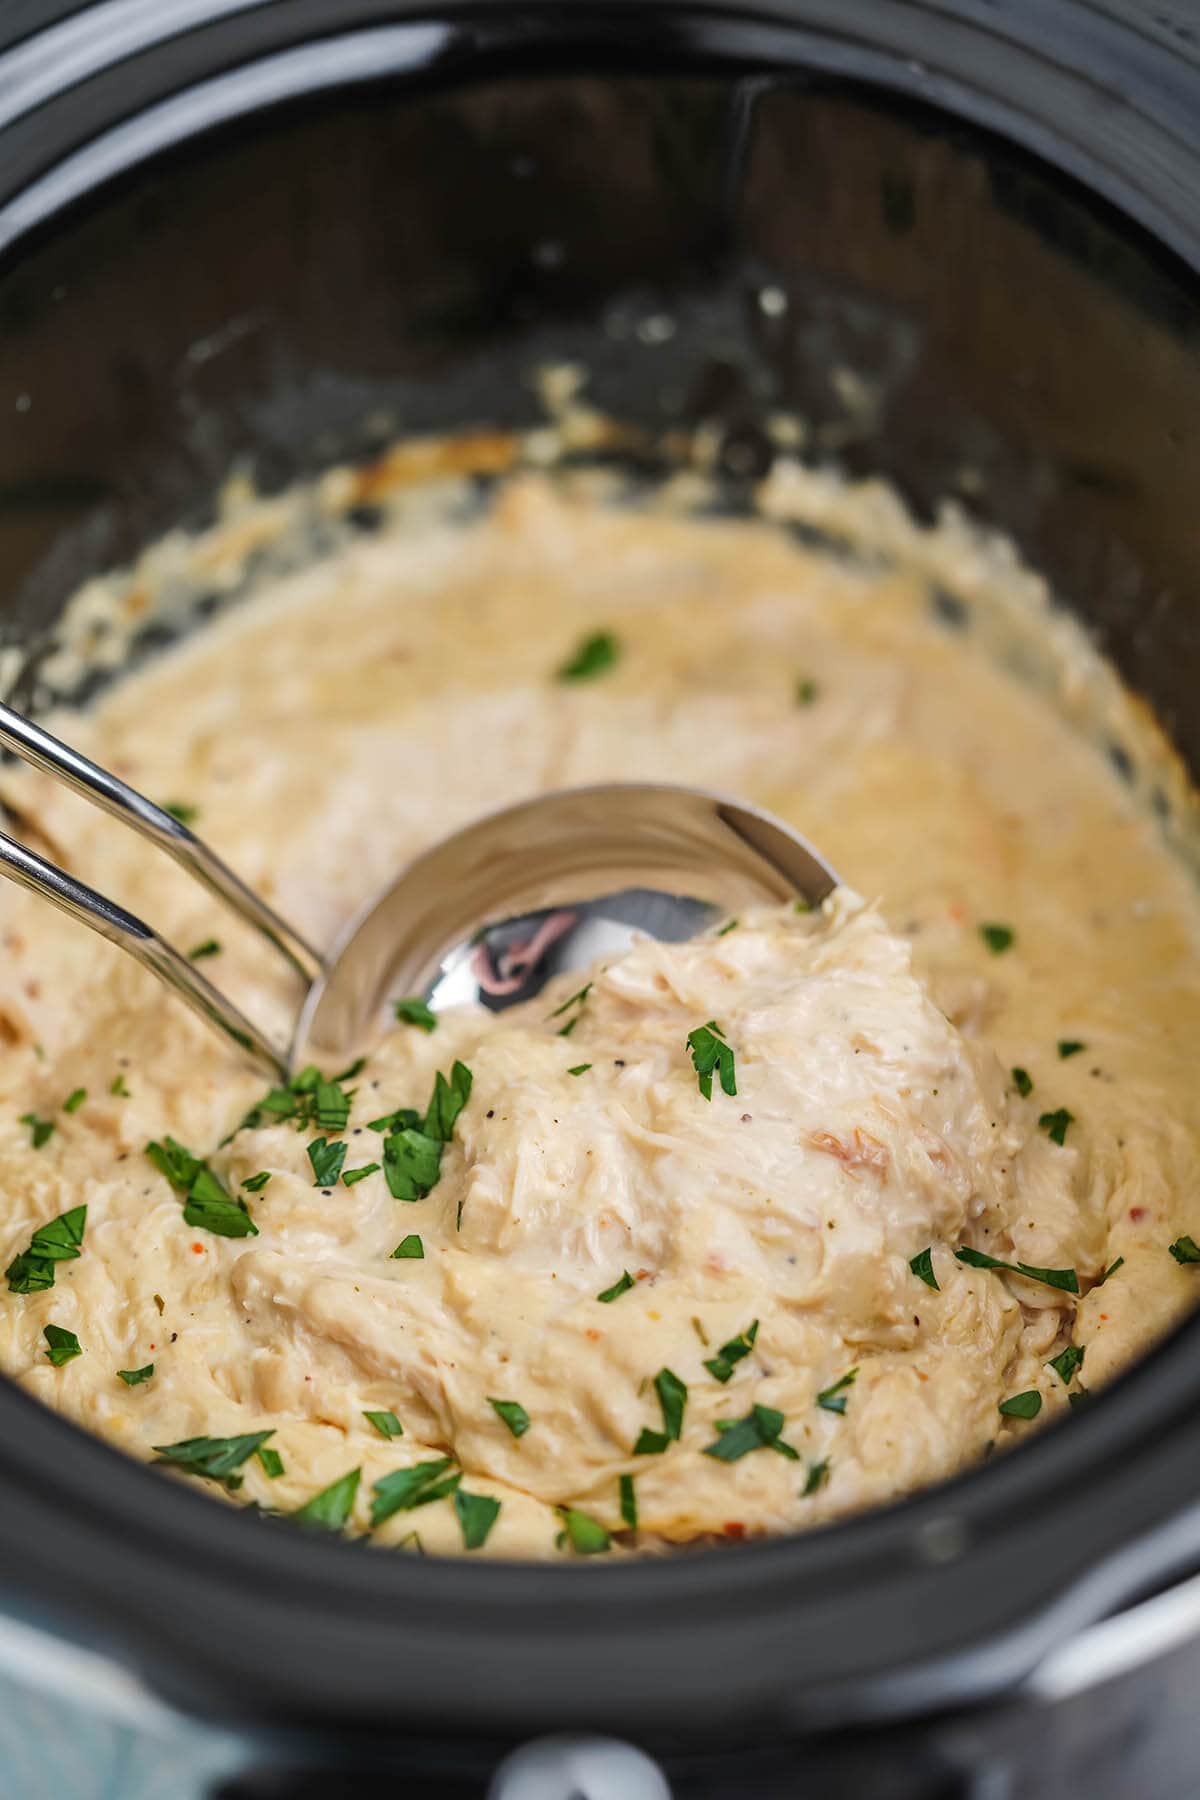 Crockpot filled with Italian shredded chicken with ladle for serving.